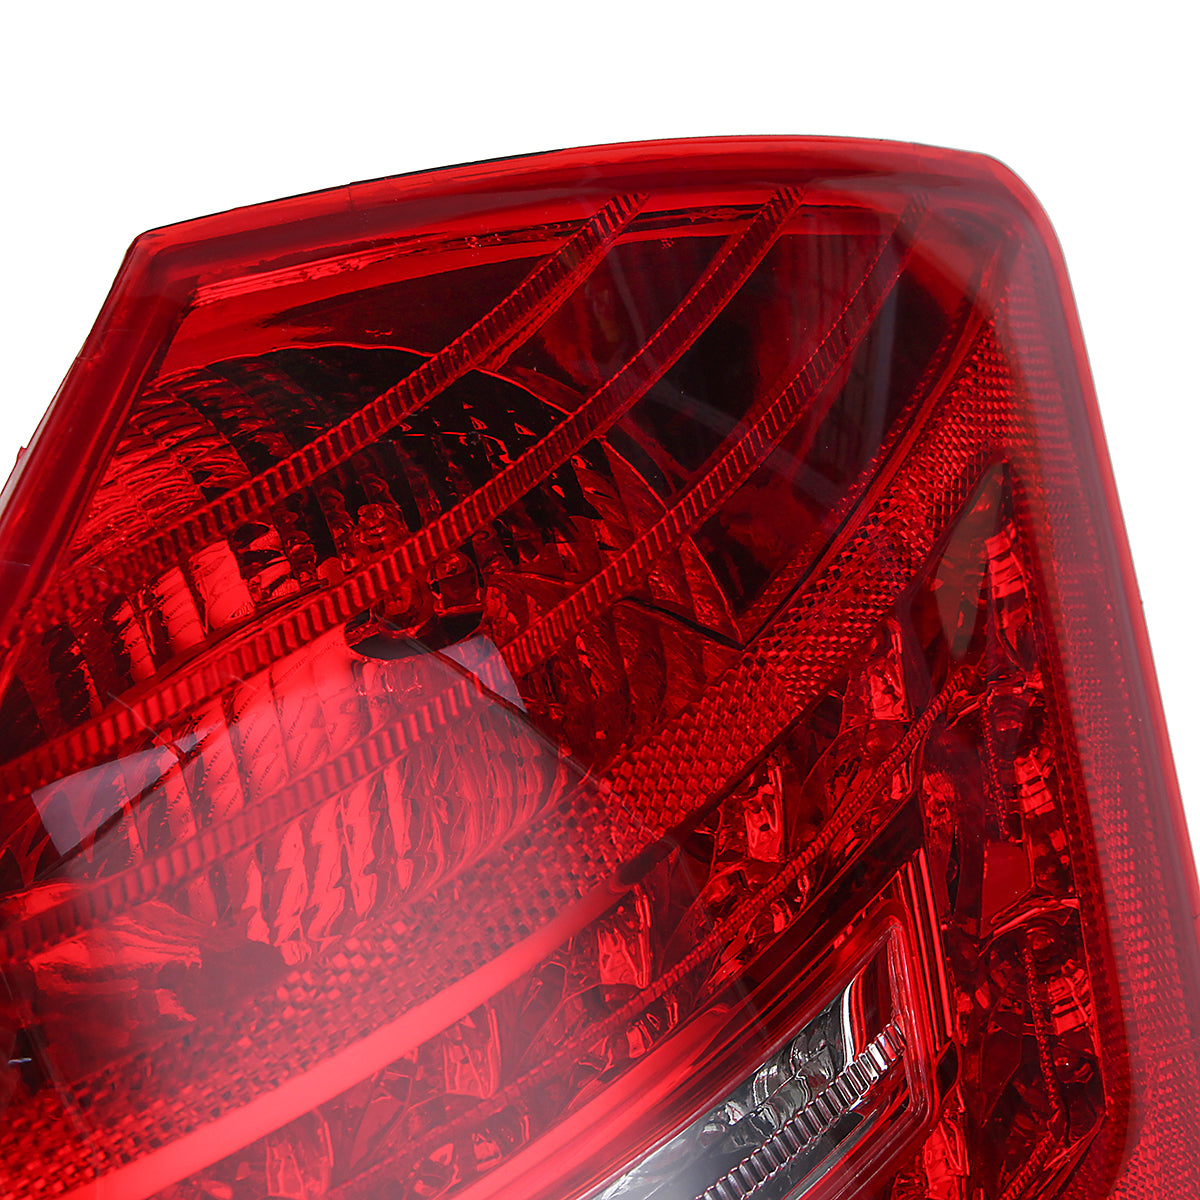 Dark Red Car Rear LED Tail Light Brake Lamp Pair for Mercedes-Benz W221 S-Class 2007-2009